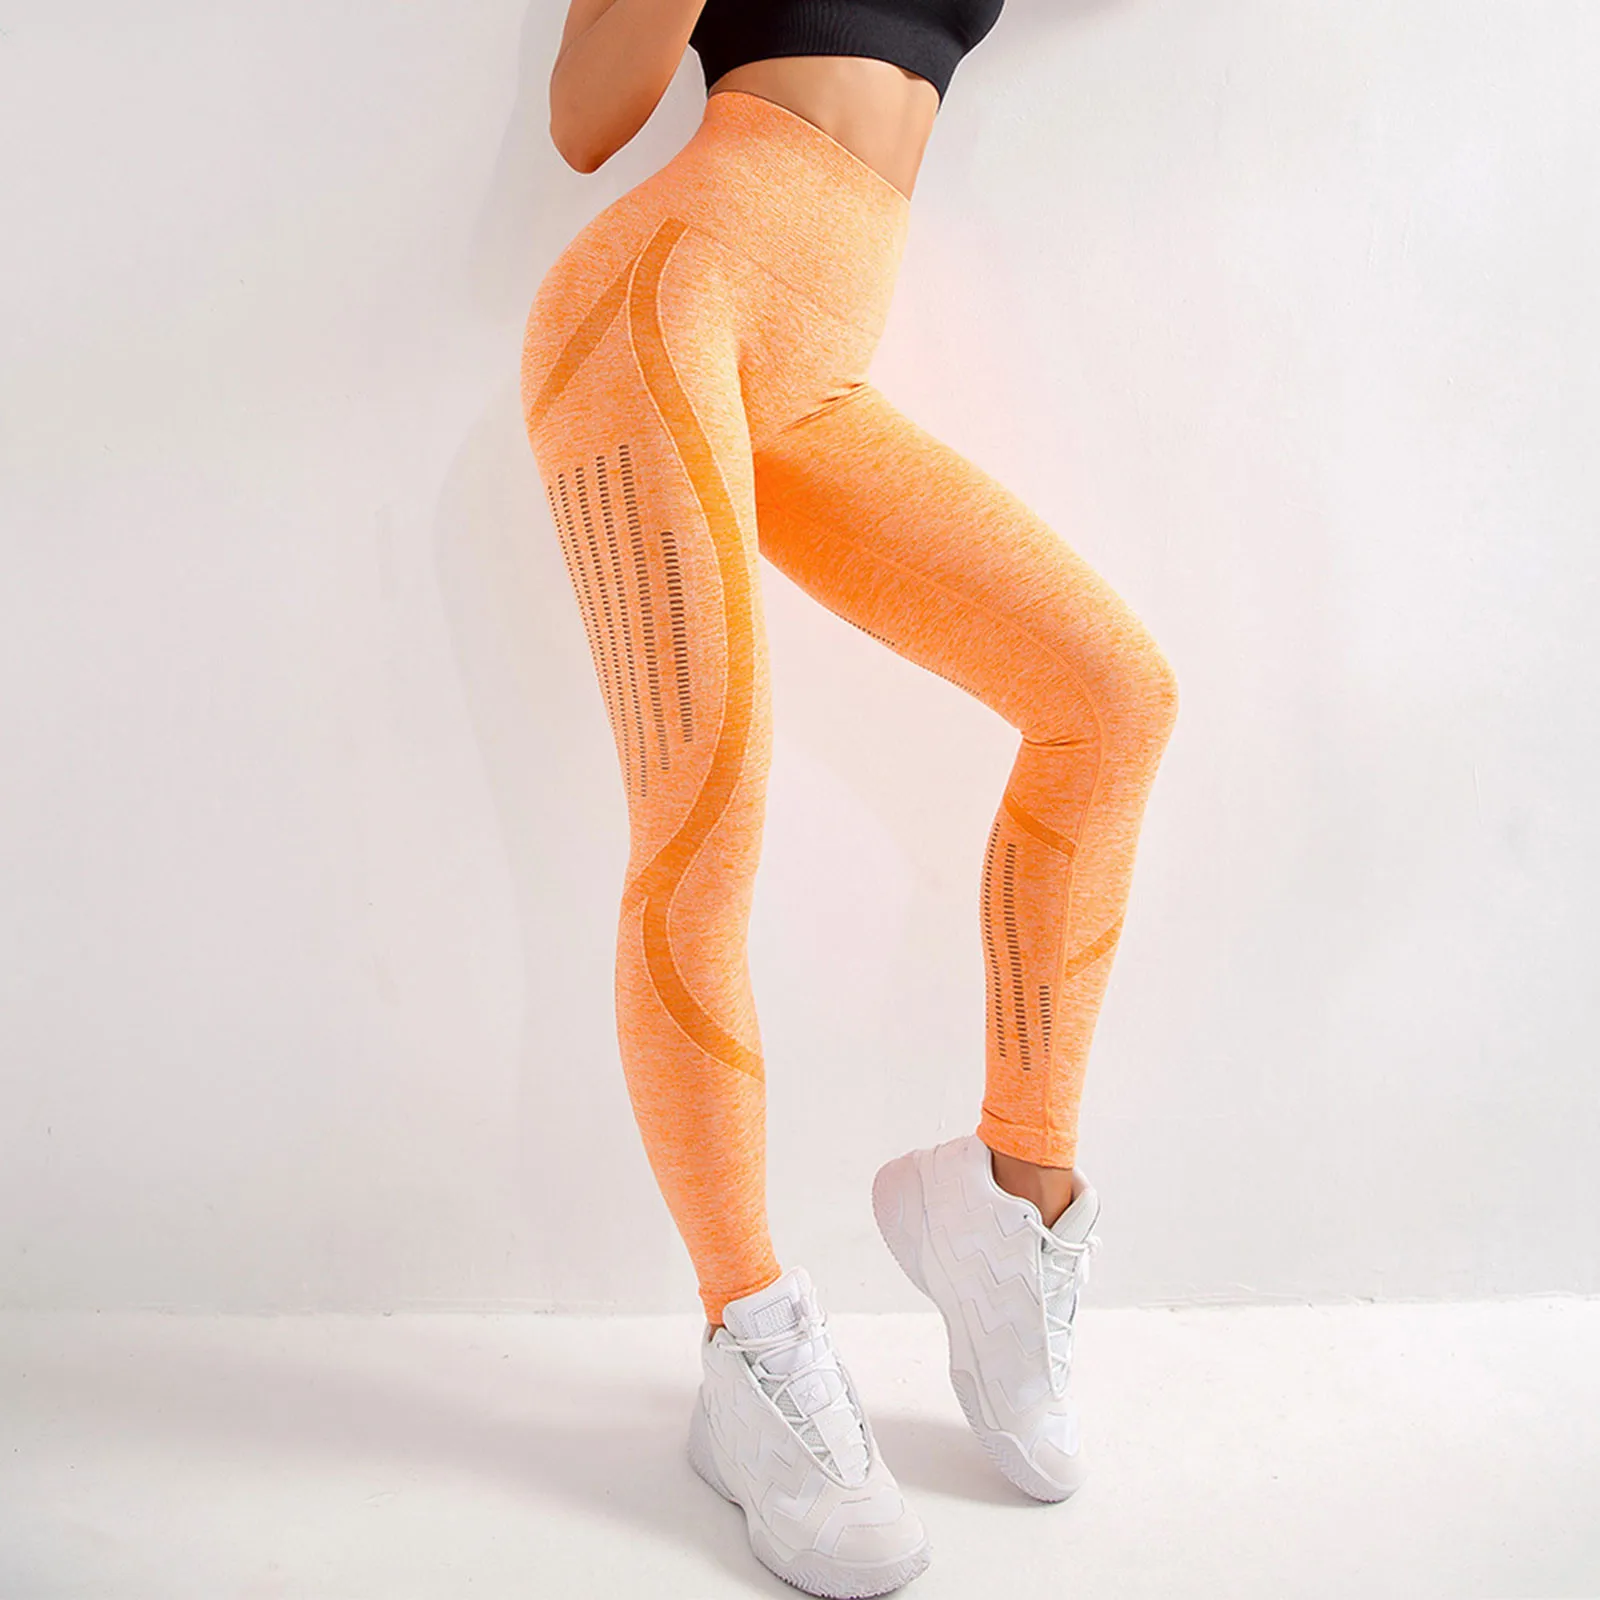 

Women Yoga Pants Seamless Sport Legging High Waist Stretchy Workout Leggings Textured Booty Tights mallas deporte mujer E2